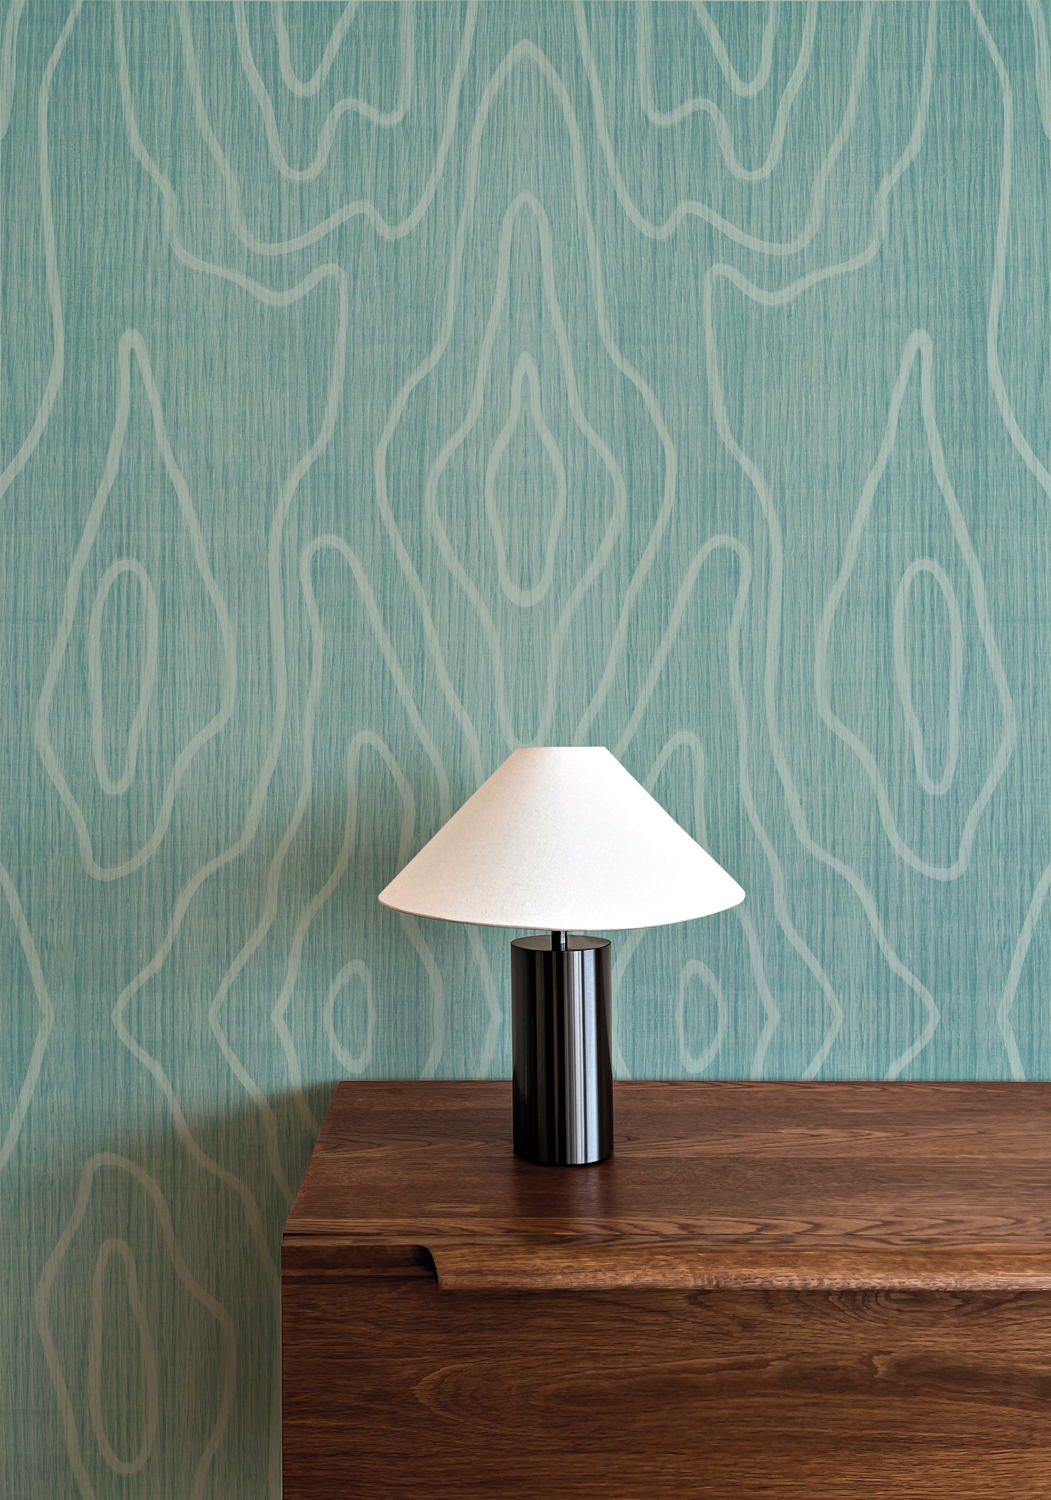 Teal-colored wallcovering behind dark wood side table and black table lamp with white shade